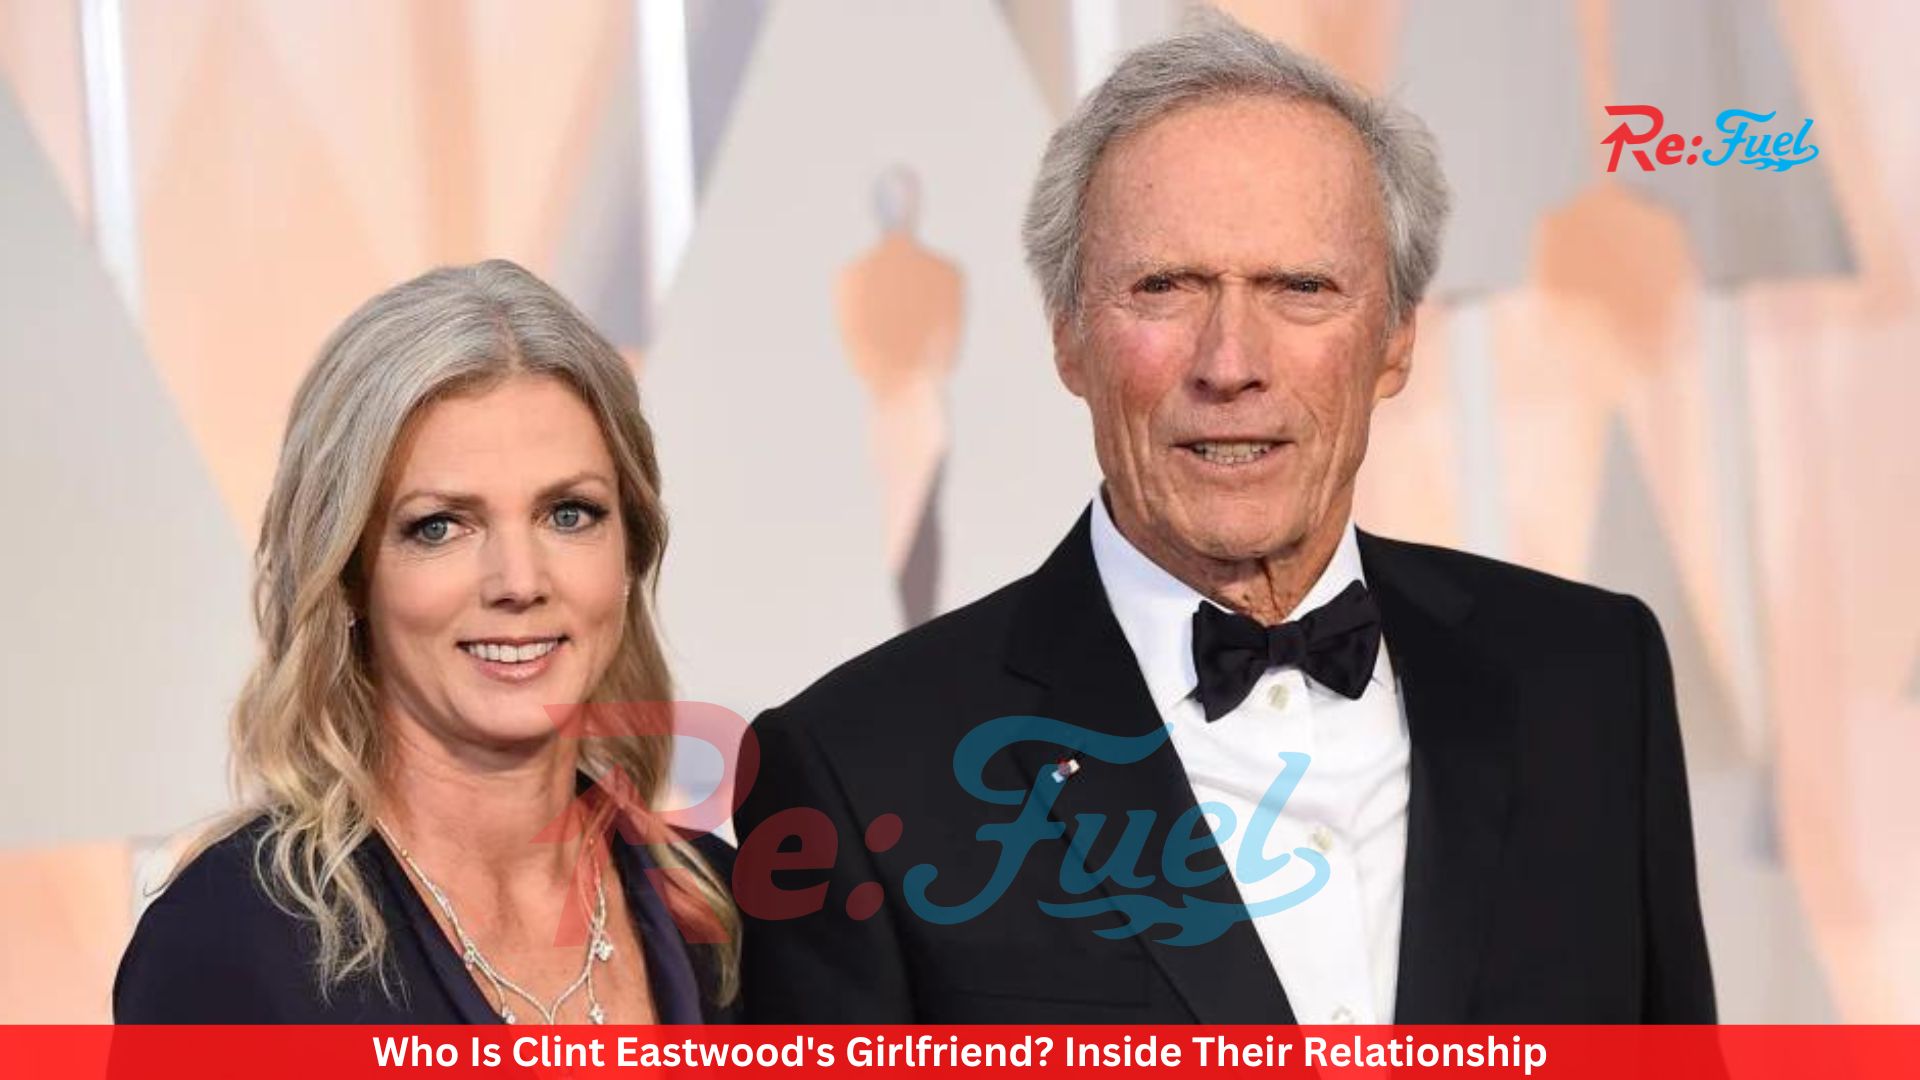 Who Is Clint Eastwood's Girlfriend? Inside Their Relationship